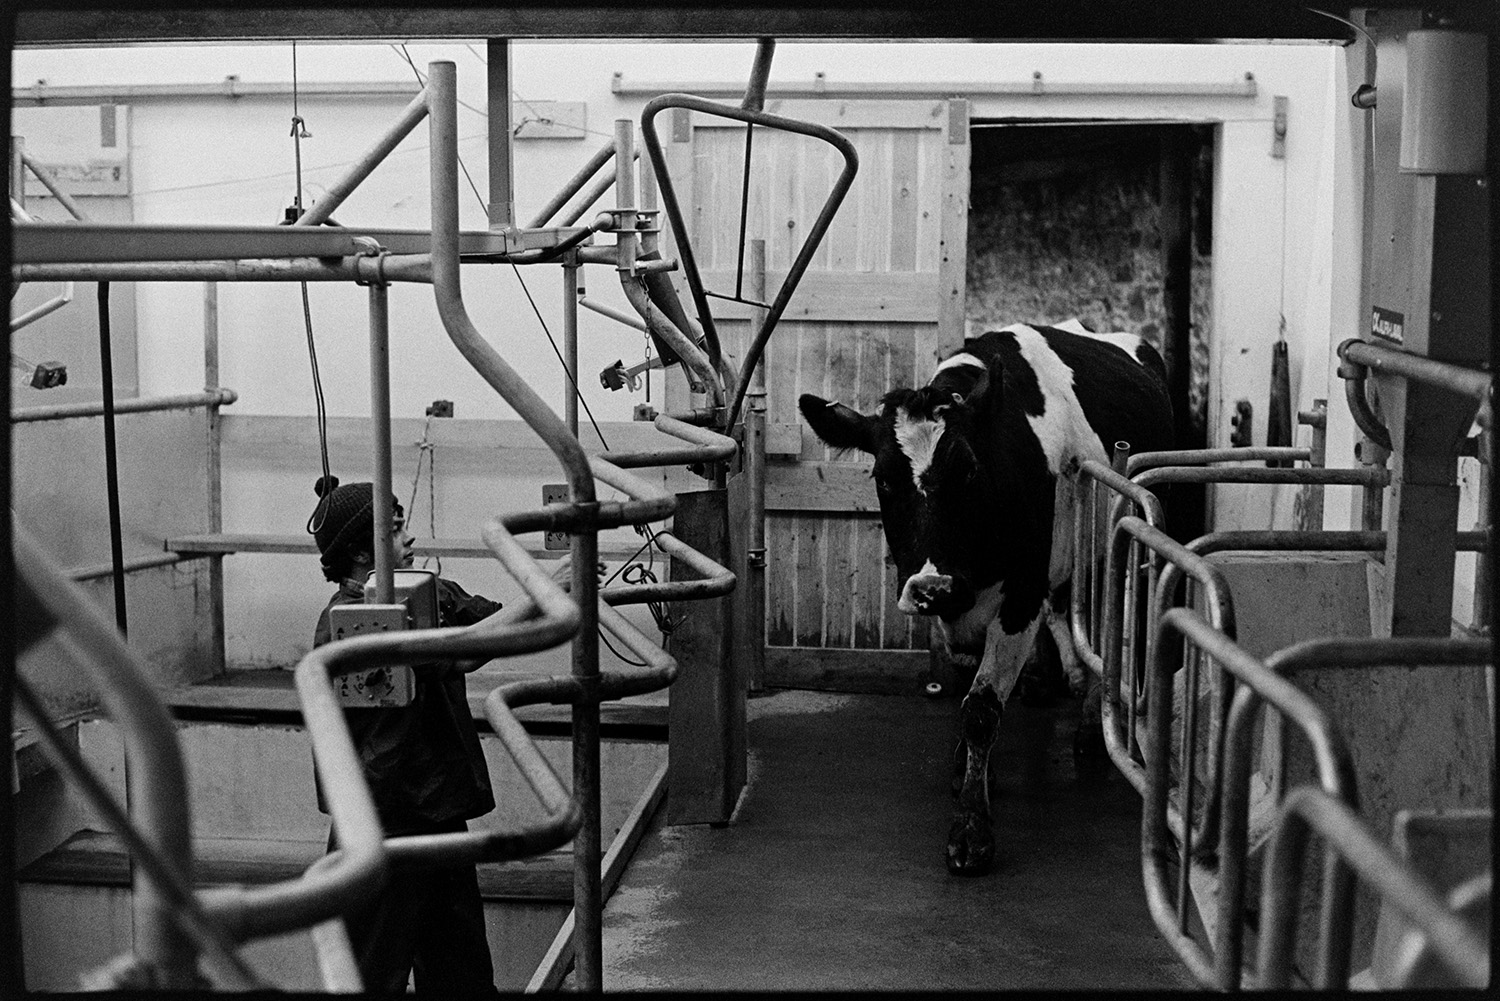 Milking parlour. 
[David Ward with machinery in the milking parlour at Nethercott, Iddesleigh. A cow is entering the parlour to be milked.]